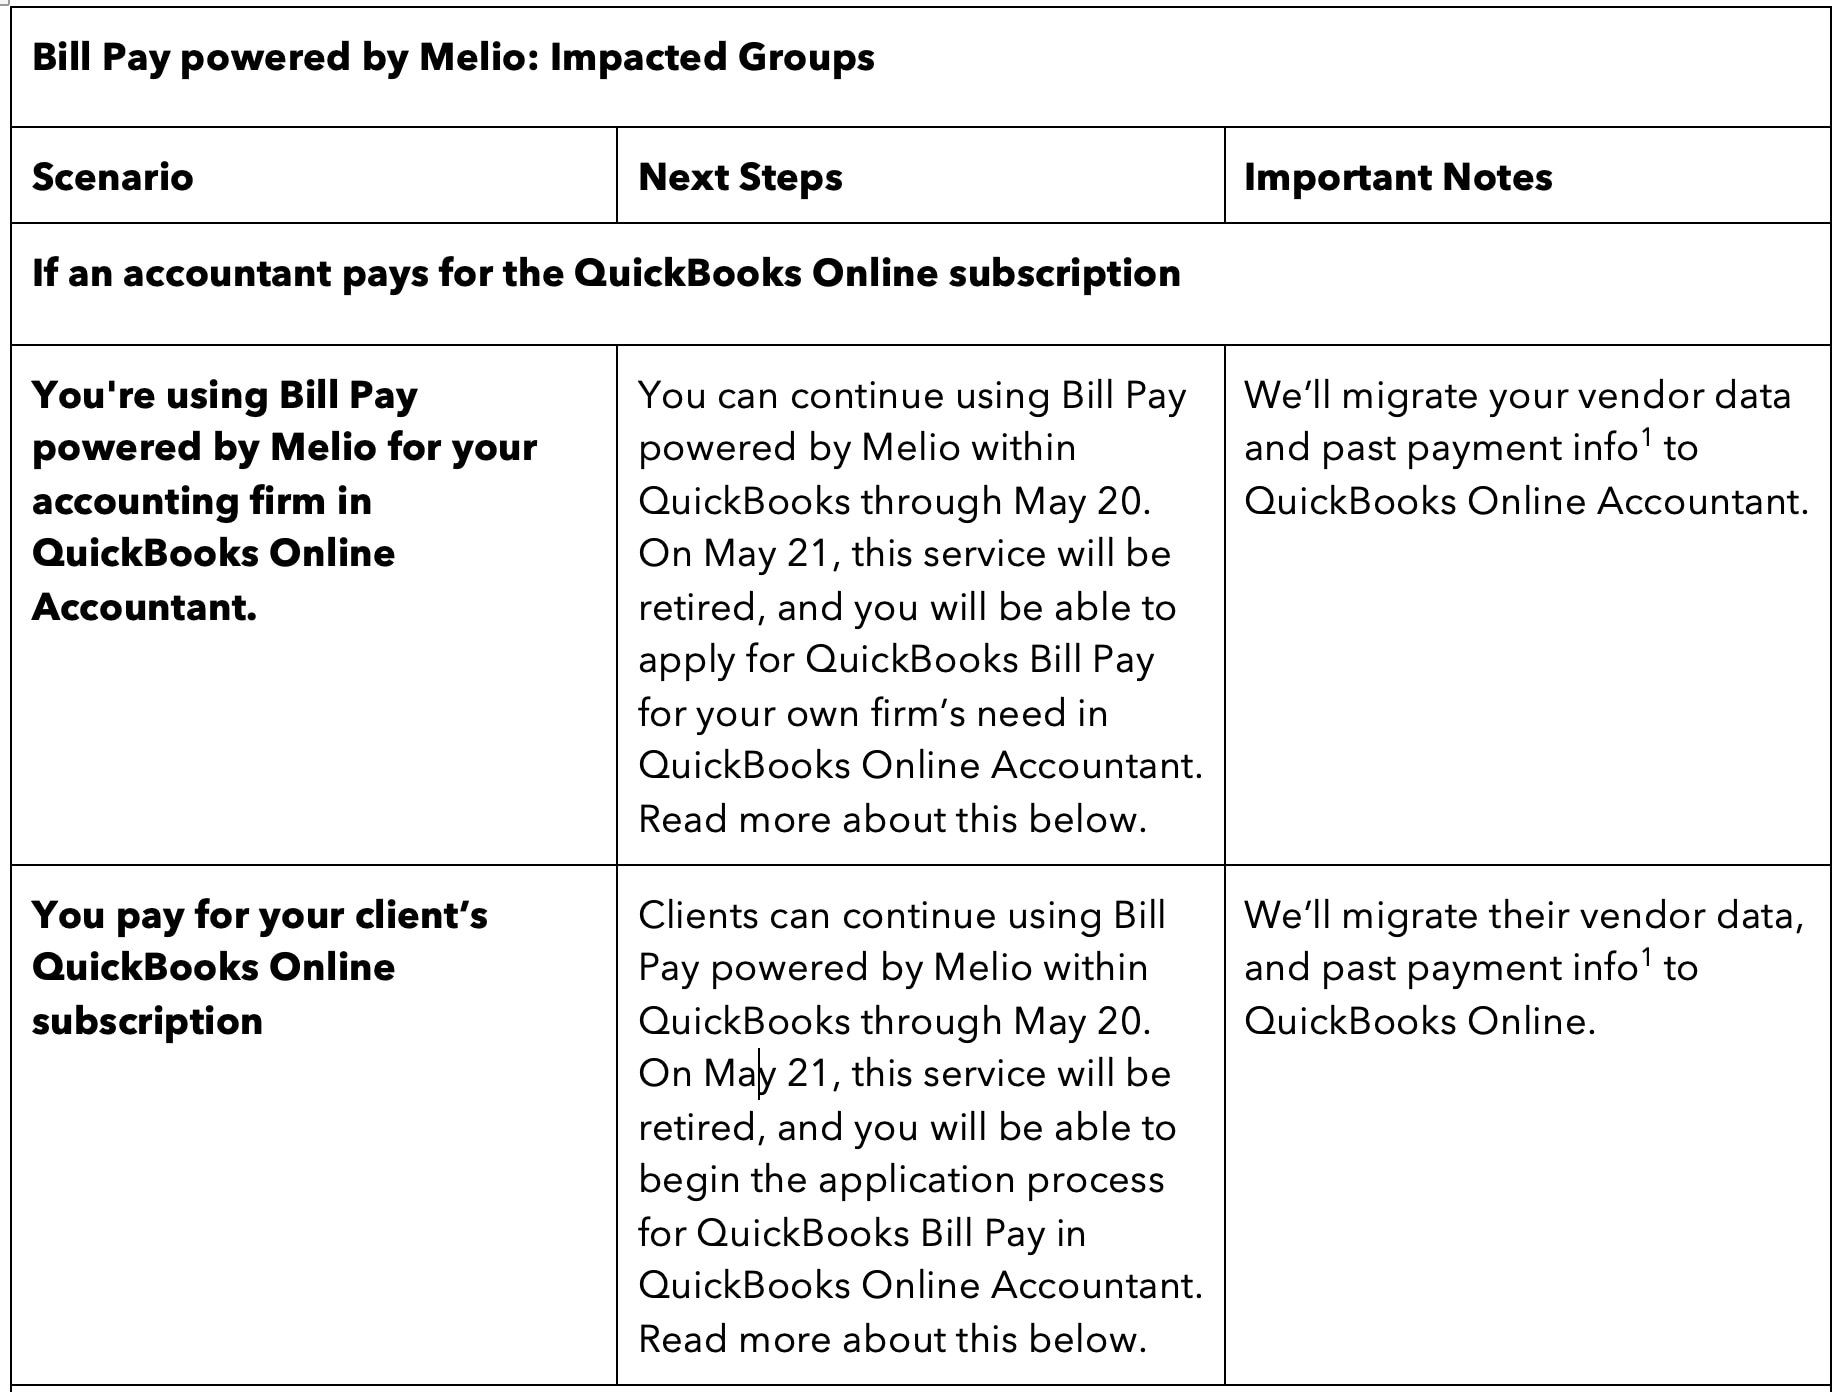 Intuit QuickBooks Bill Pay updates for accountants